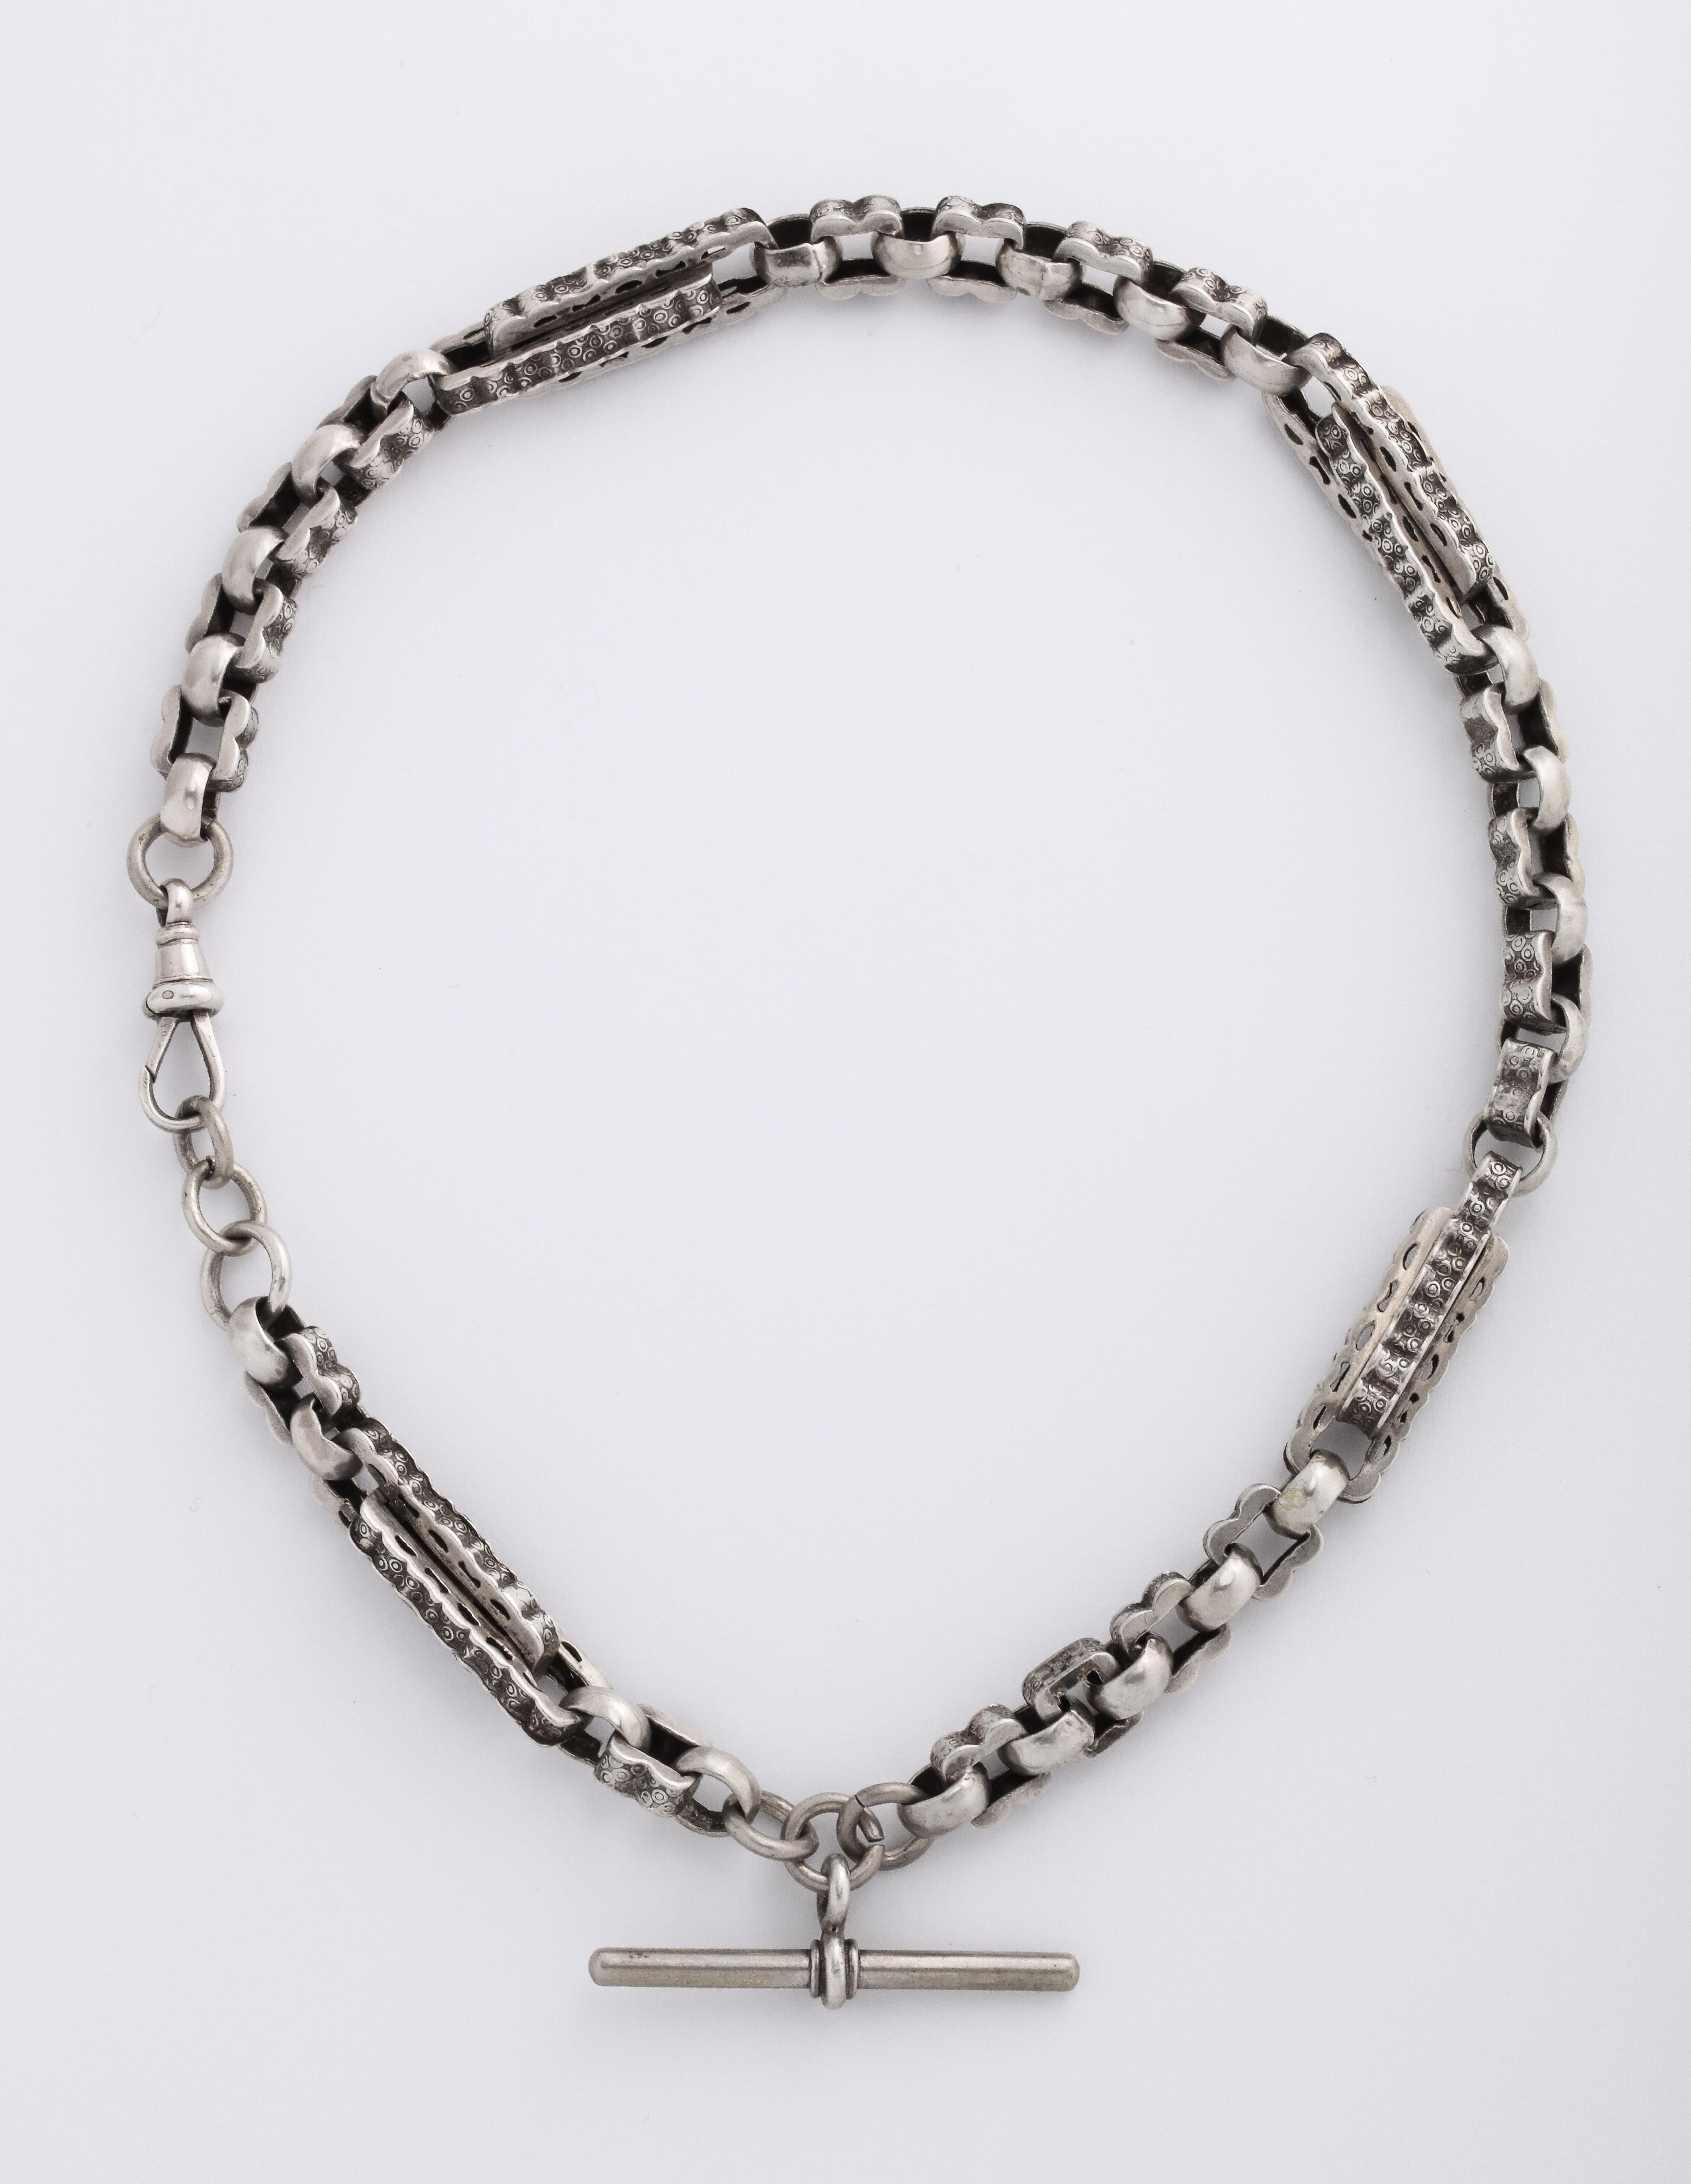 Victorian Prince Albert Chain in Sterling has interesting links that vary in size and direction. There are wiggly square links, alternating horizontal and vertical links, and large rectangular ridged links with a t bar added. Prince Albert chains